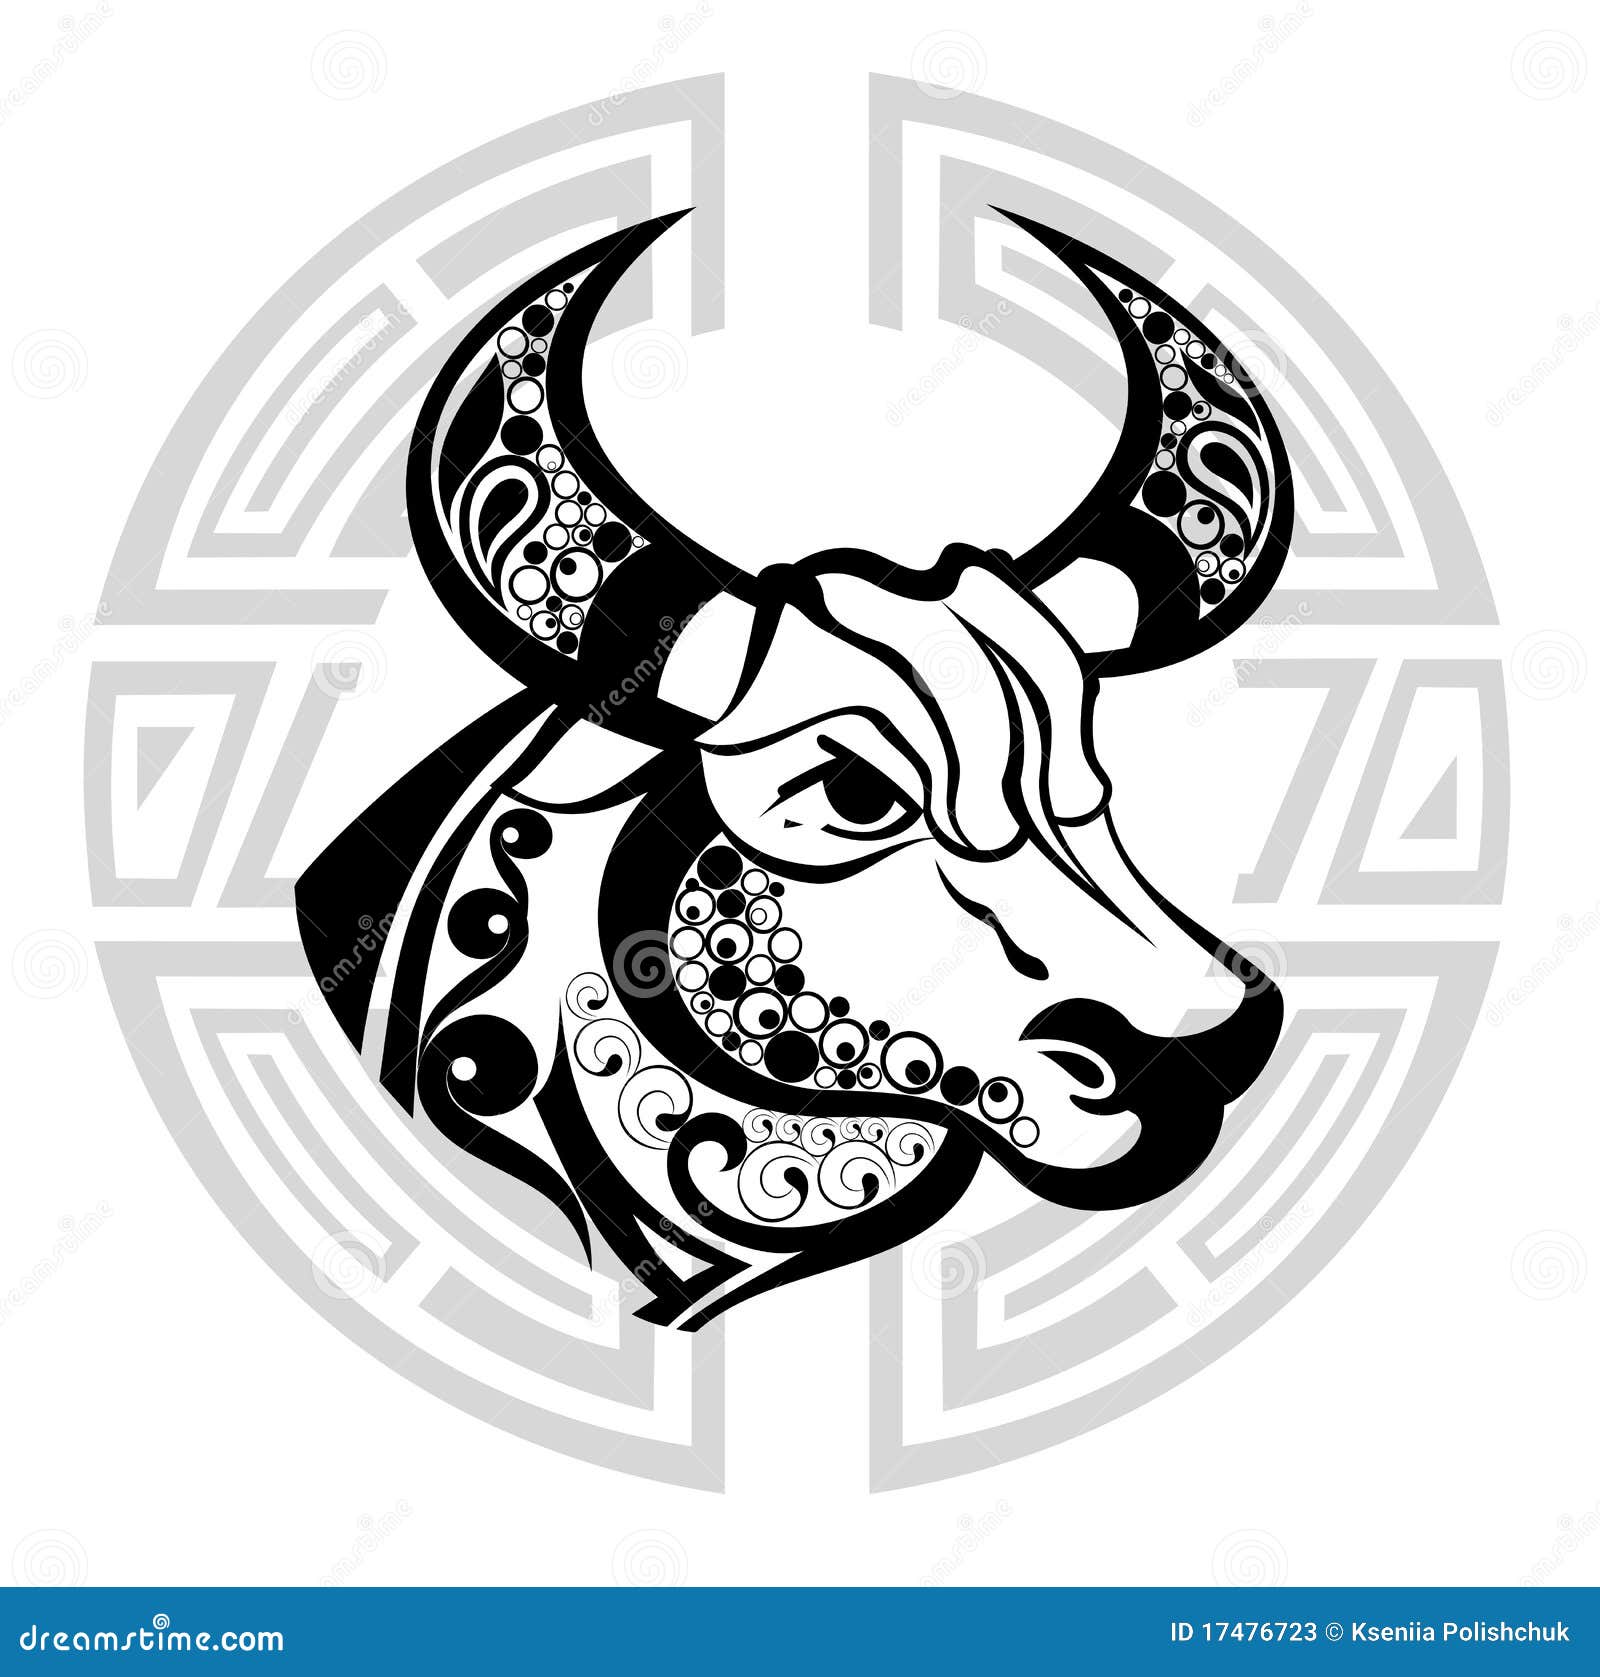 52 Gorgeous Taurus Tattoos with Meaning - Our Mindful Life | Taurus tattoos,  Taurus symbol tattoo, Bull tattoos